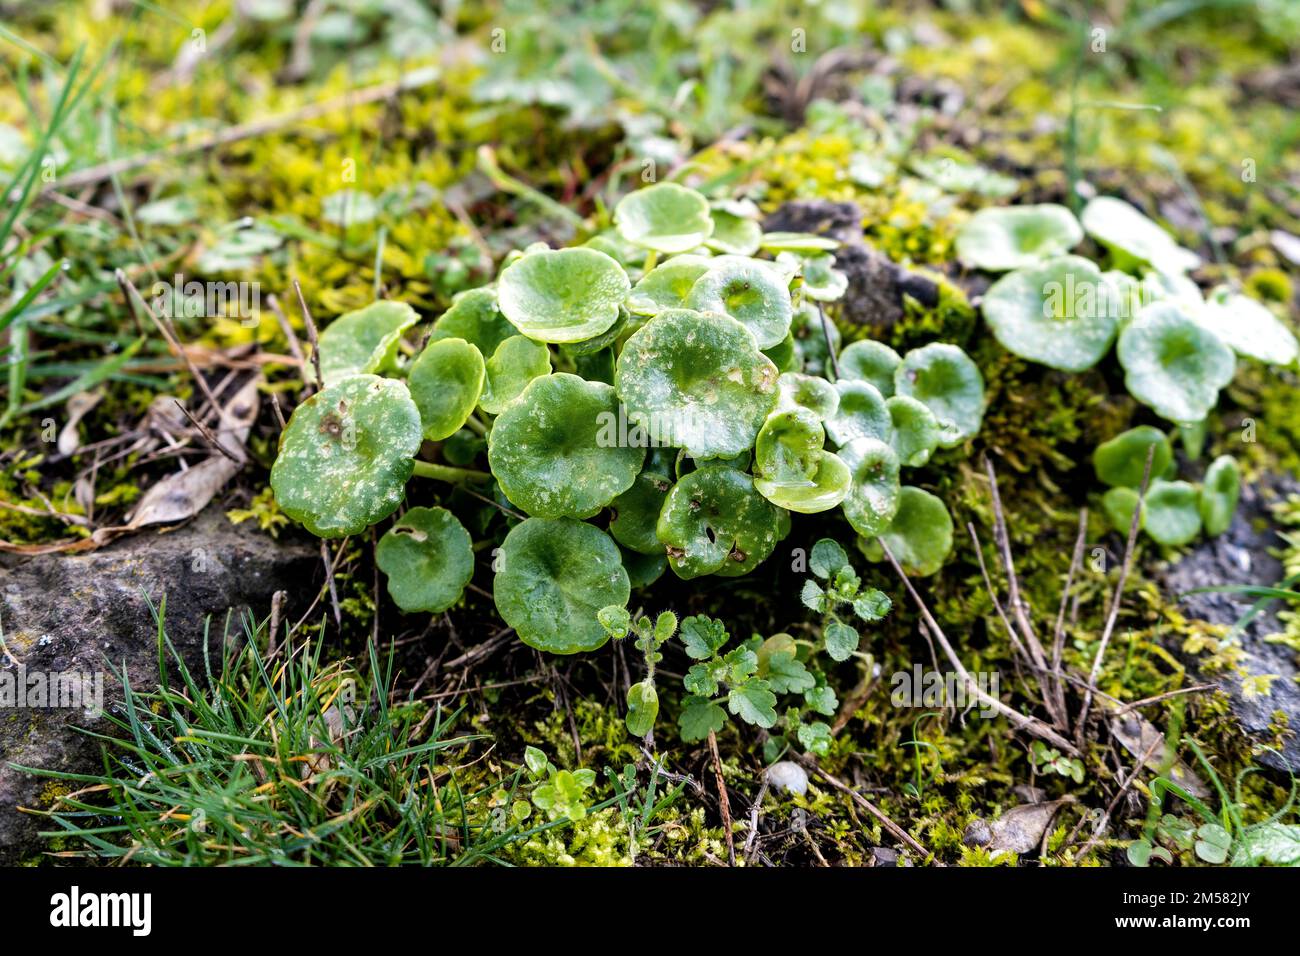 Umbilicus rupestris known also as navelwort, penny-pies, wall pennywort or 'Venus' belly button' is a edible plant in the stonecrop family Crassulacea. Stock Photo